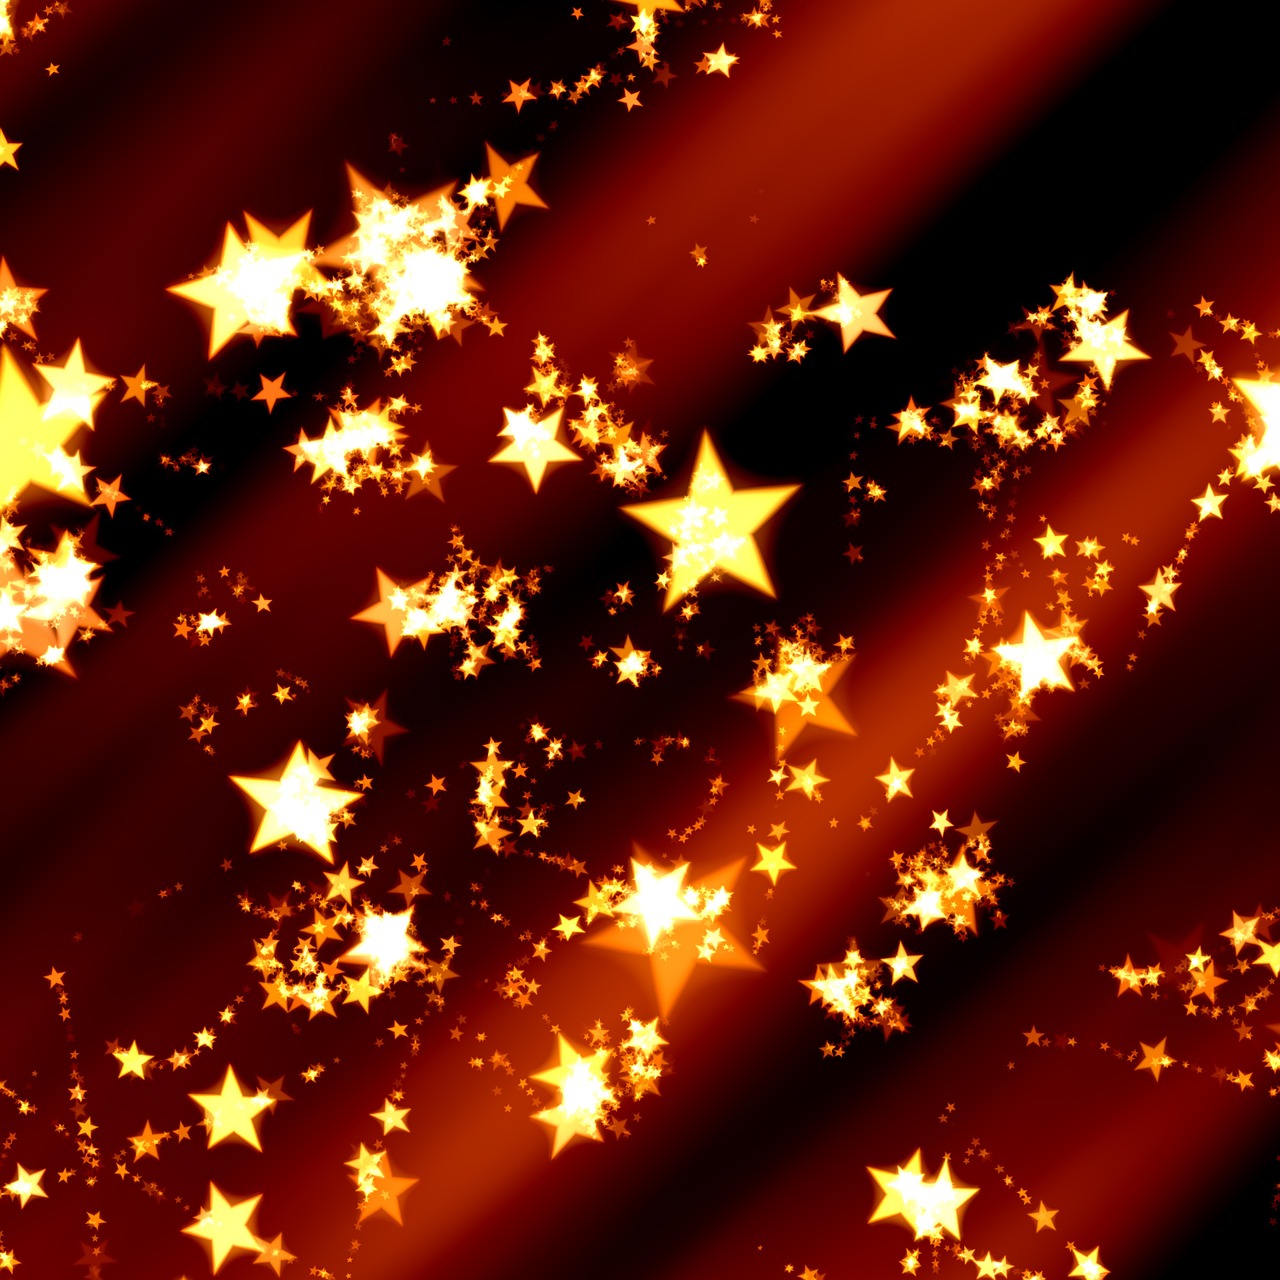 a lot of gold stars on a black background, digital art, flickr, glowing red, fireflies and sparkling wisps, stars and stripes, amber